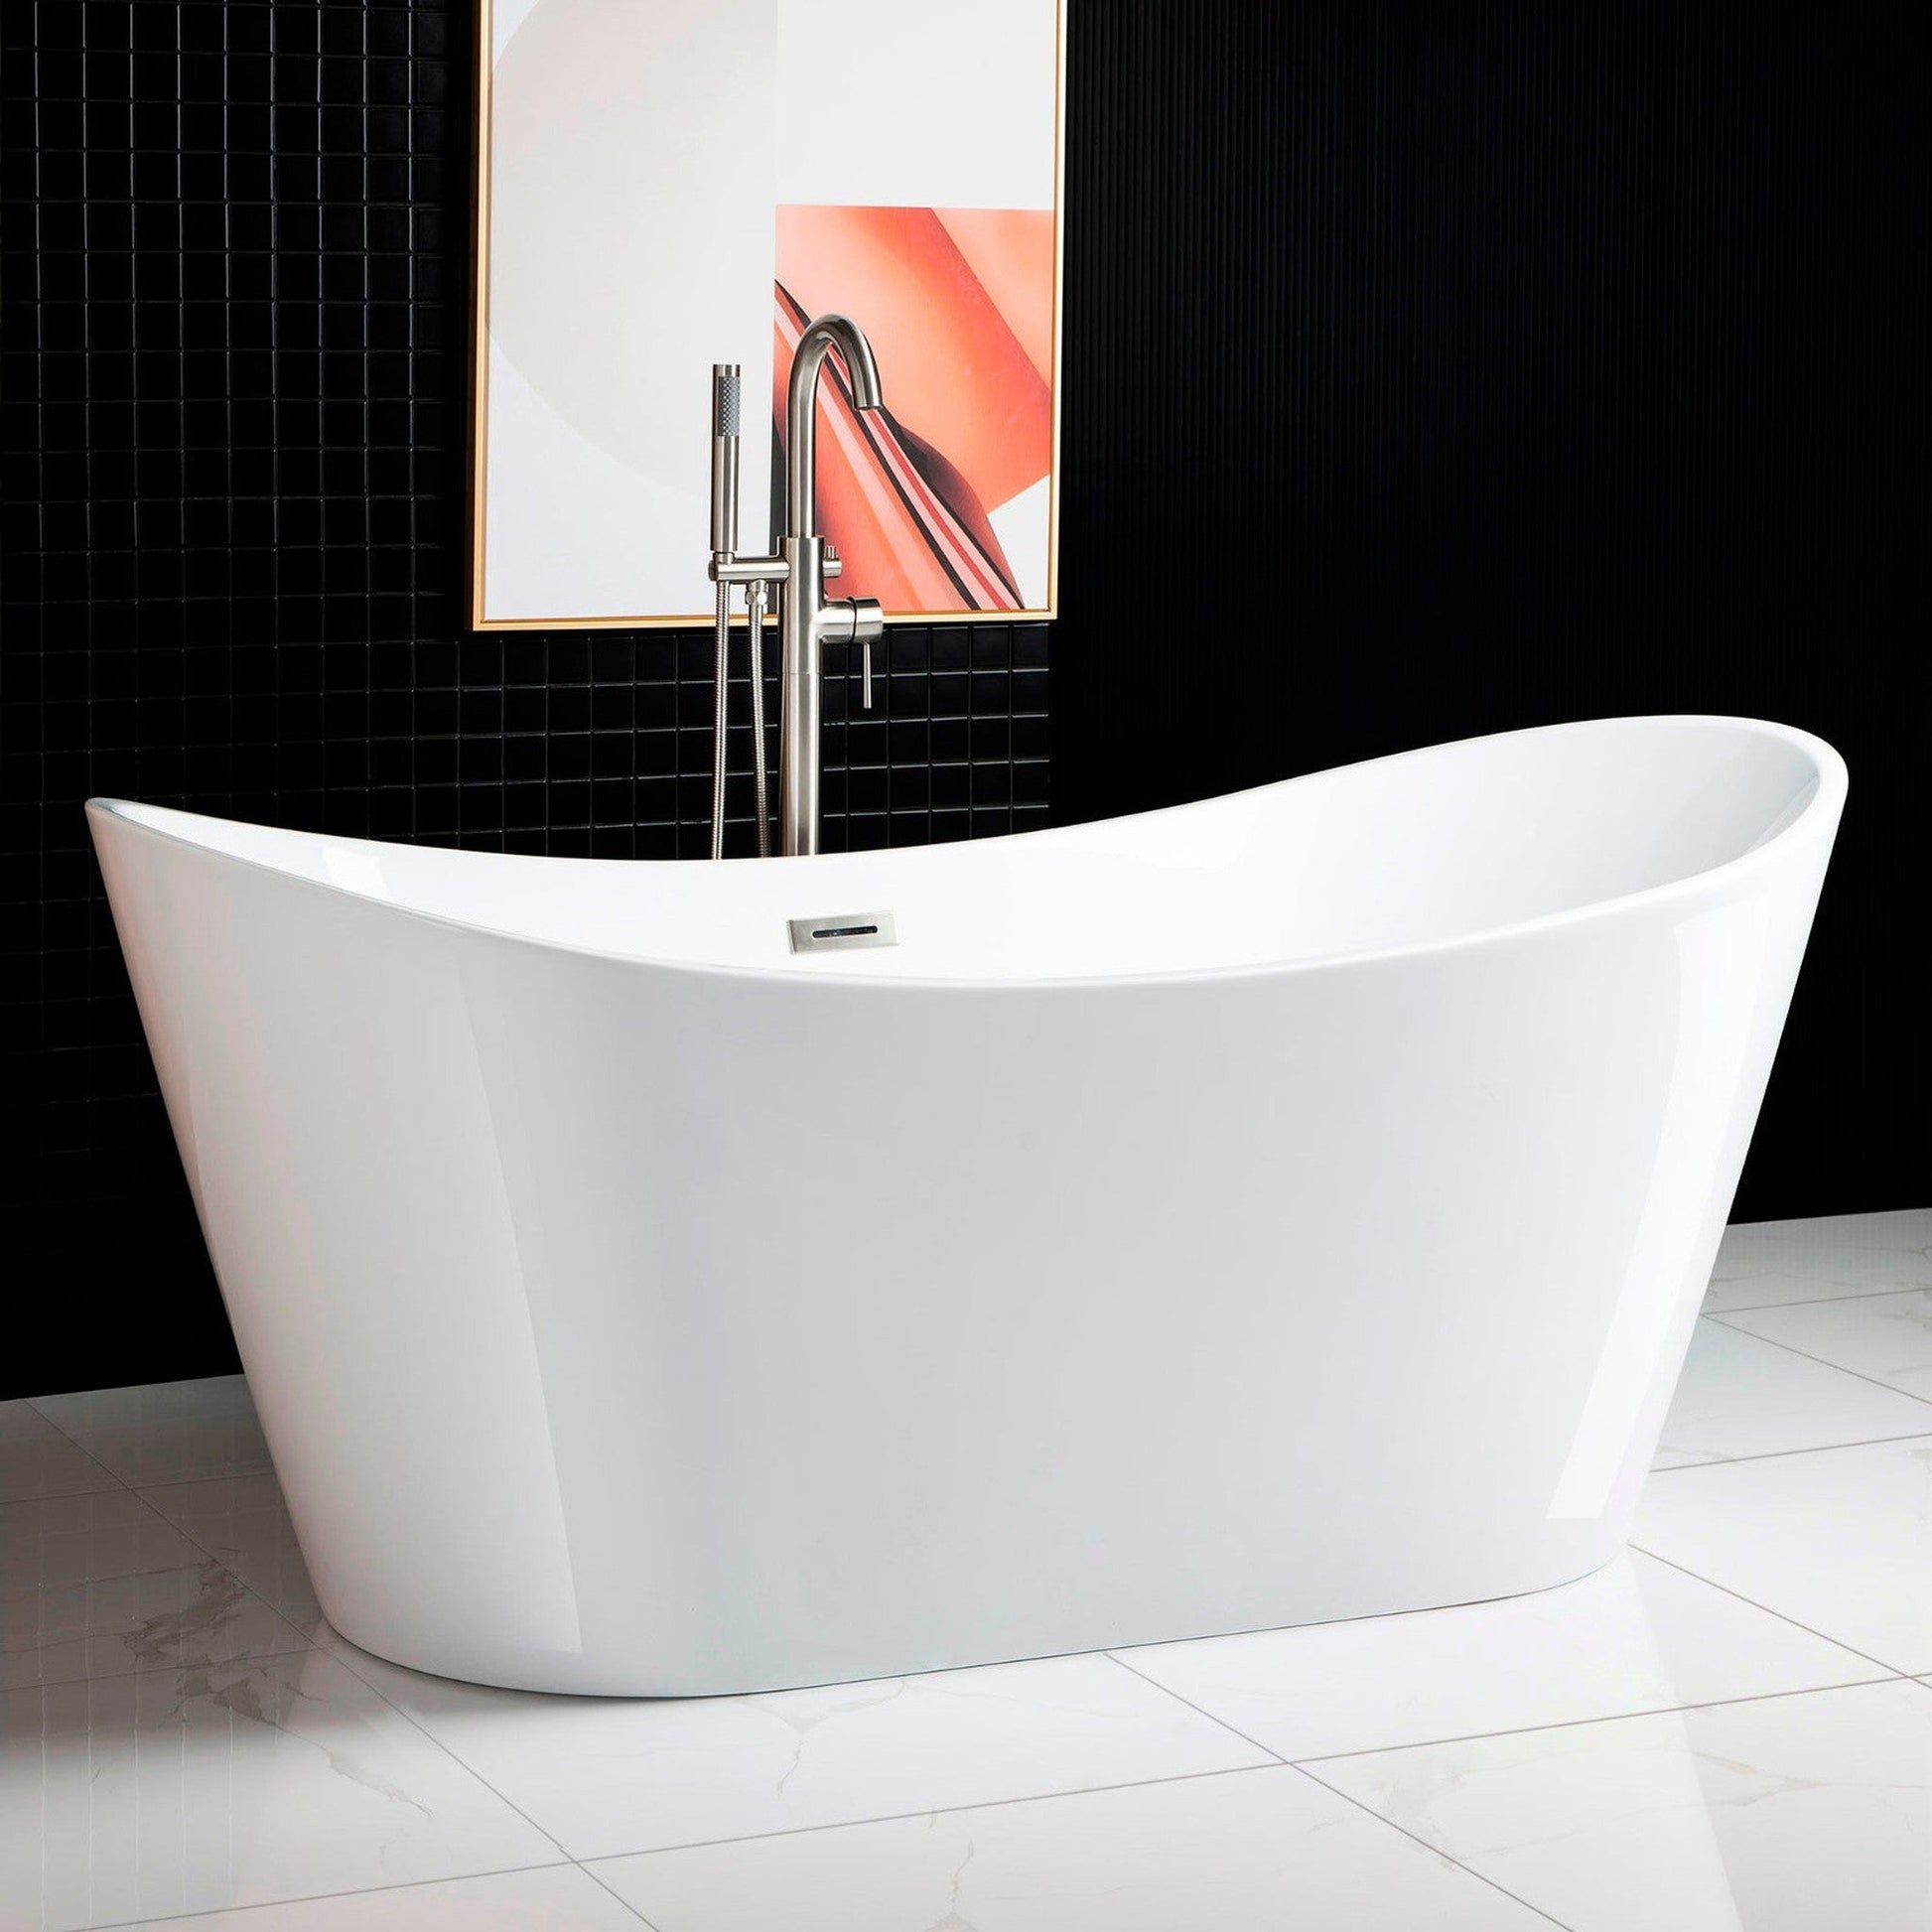 WoodBridge B0010 67" White Acrylic Freestanding Contemporary Soaking Bathtub With Chrome Drain, Overflow, F-0004 Tub Filler and Caddy Tray